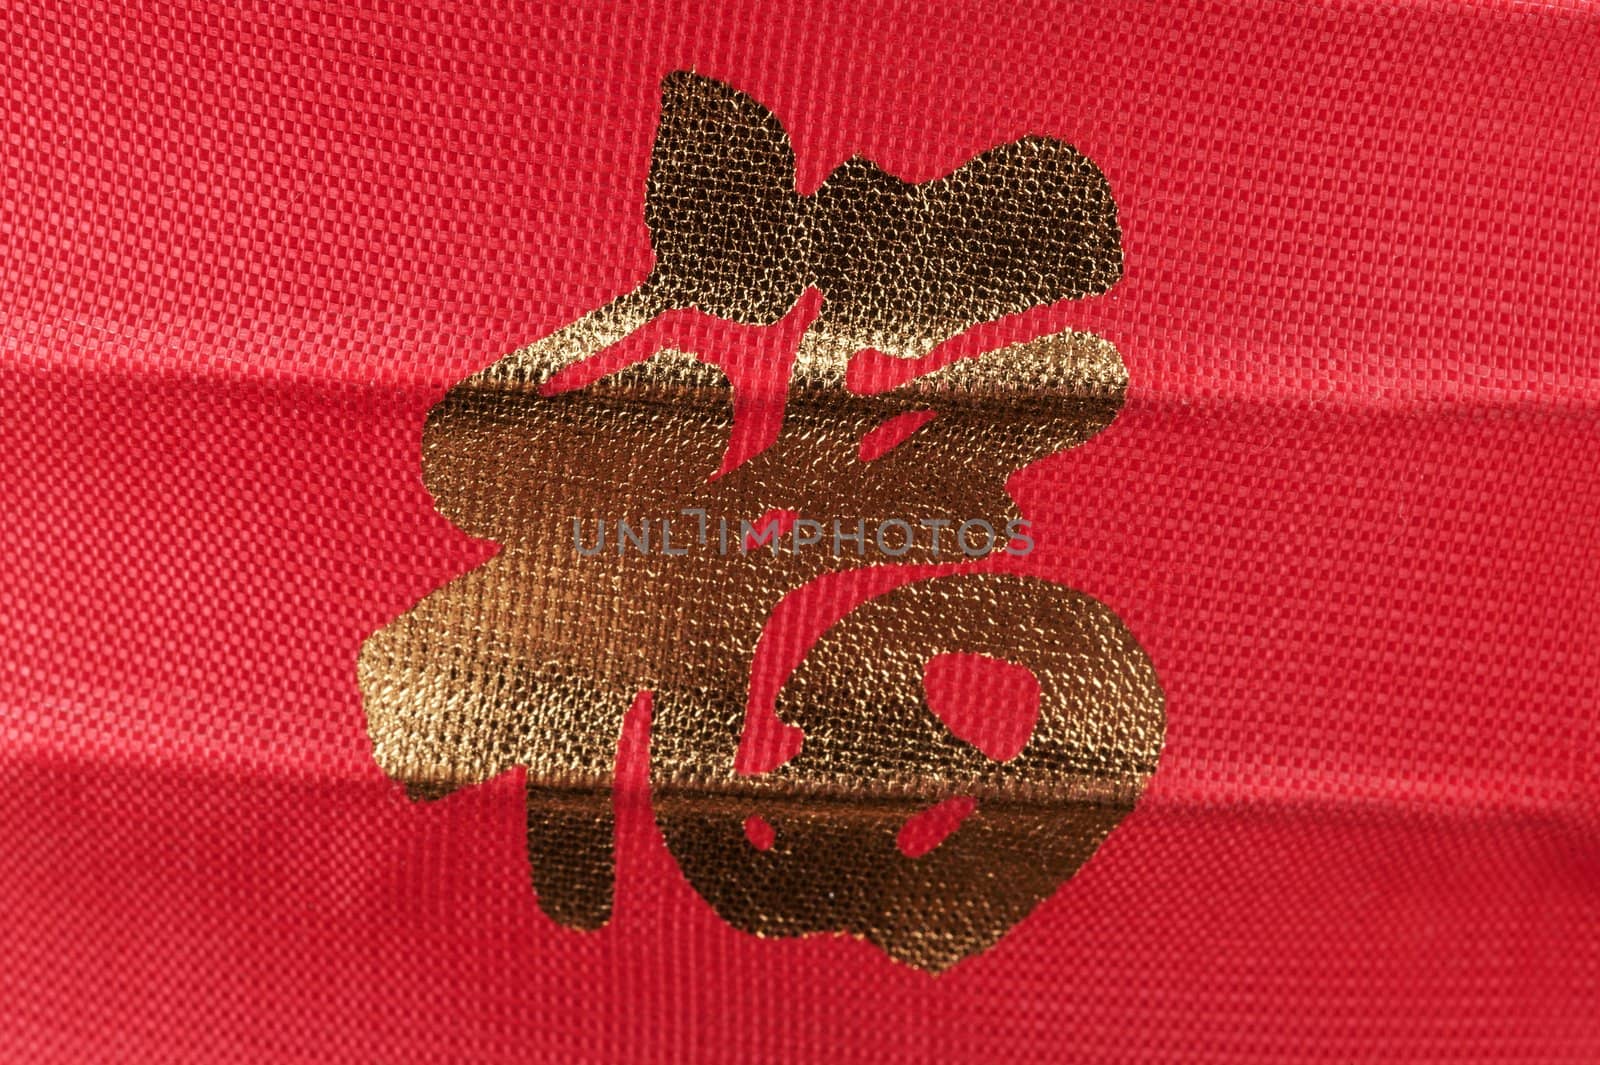 Chinese word 'Fu' which means happyness on red cloth